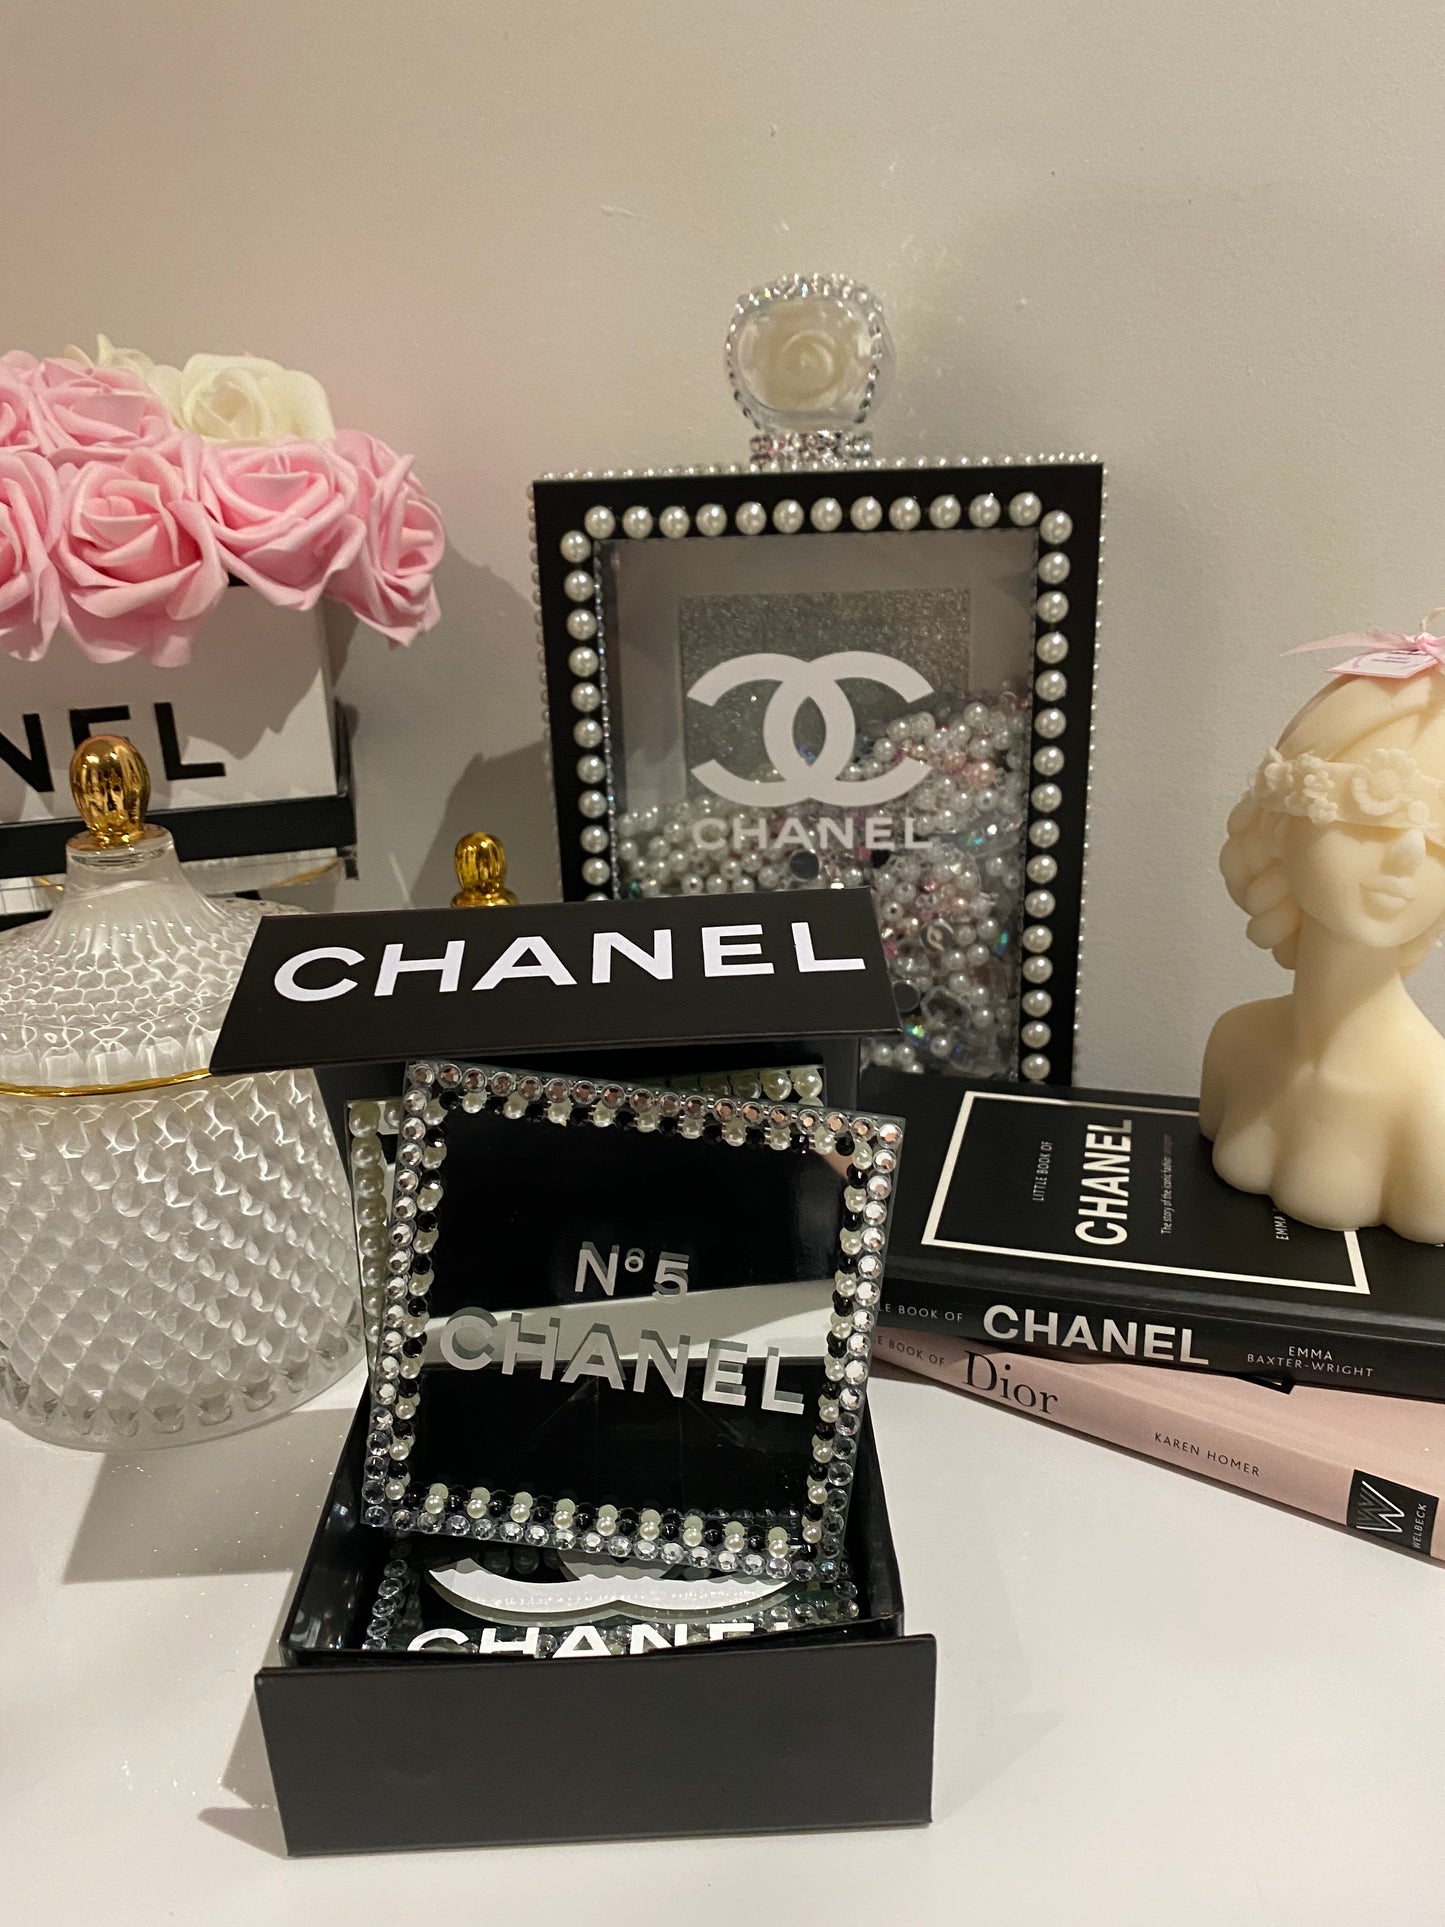 Pretty Powerful - Chanel mirrored coasters 🌟 Set of 2 for